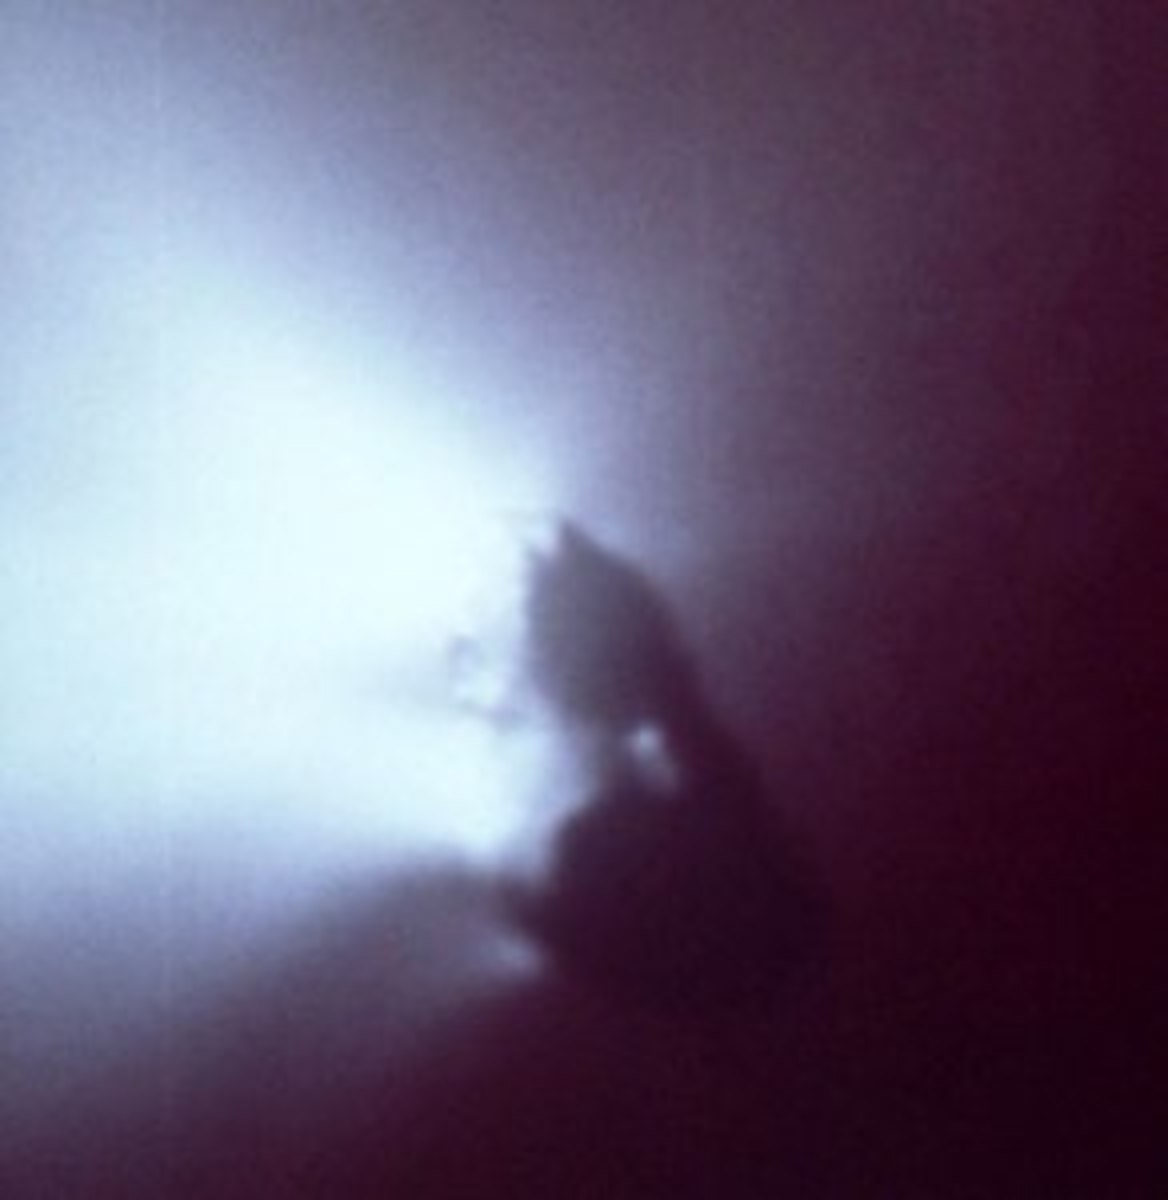 The nucleus of Halley's Comet taken in 1986 by the Giotto space probe. Shown is the dark coloration of the nucleus and jets of dust and gas erupting from its surface.